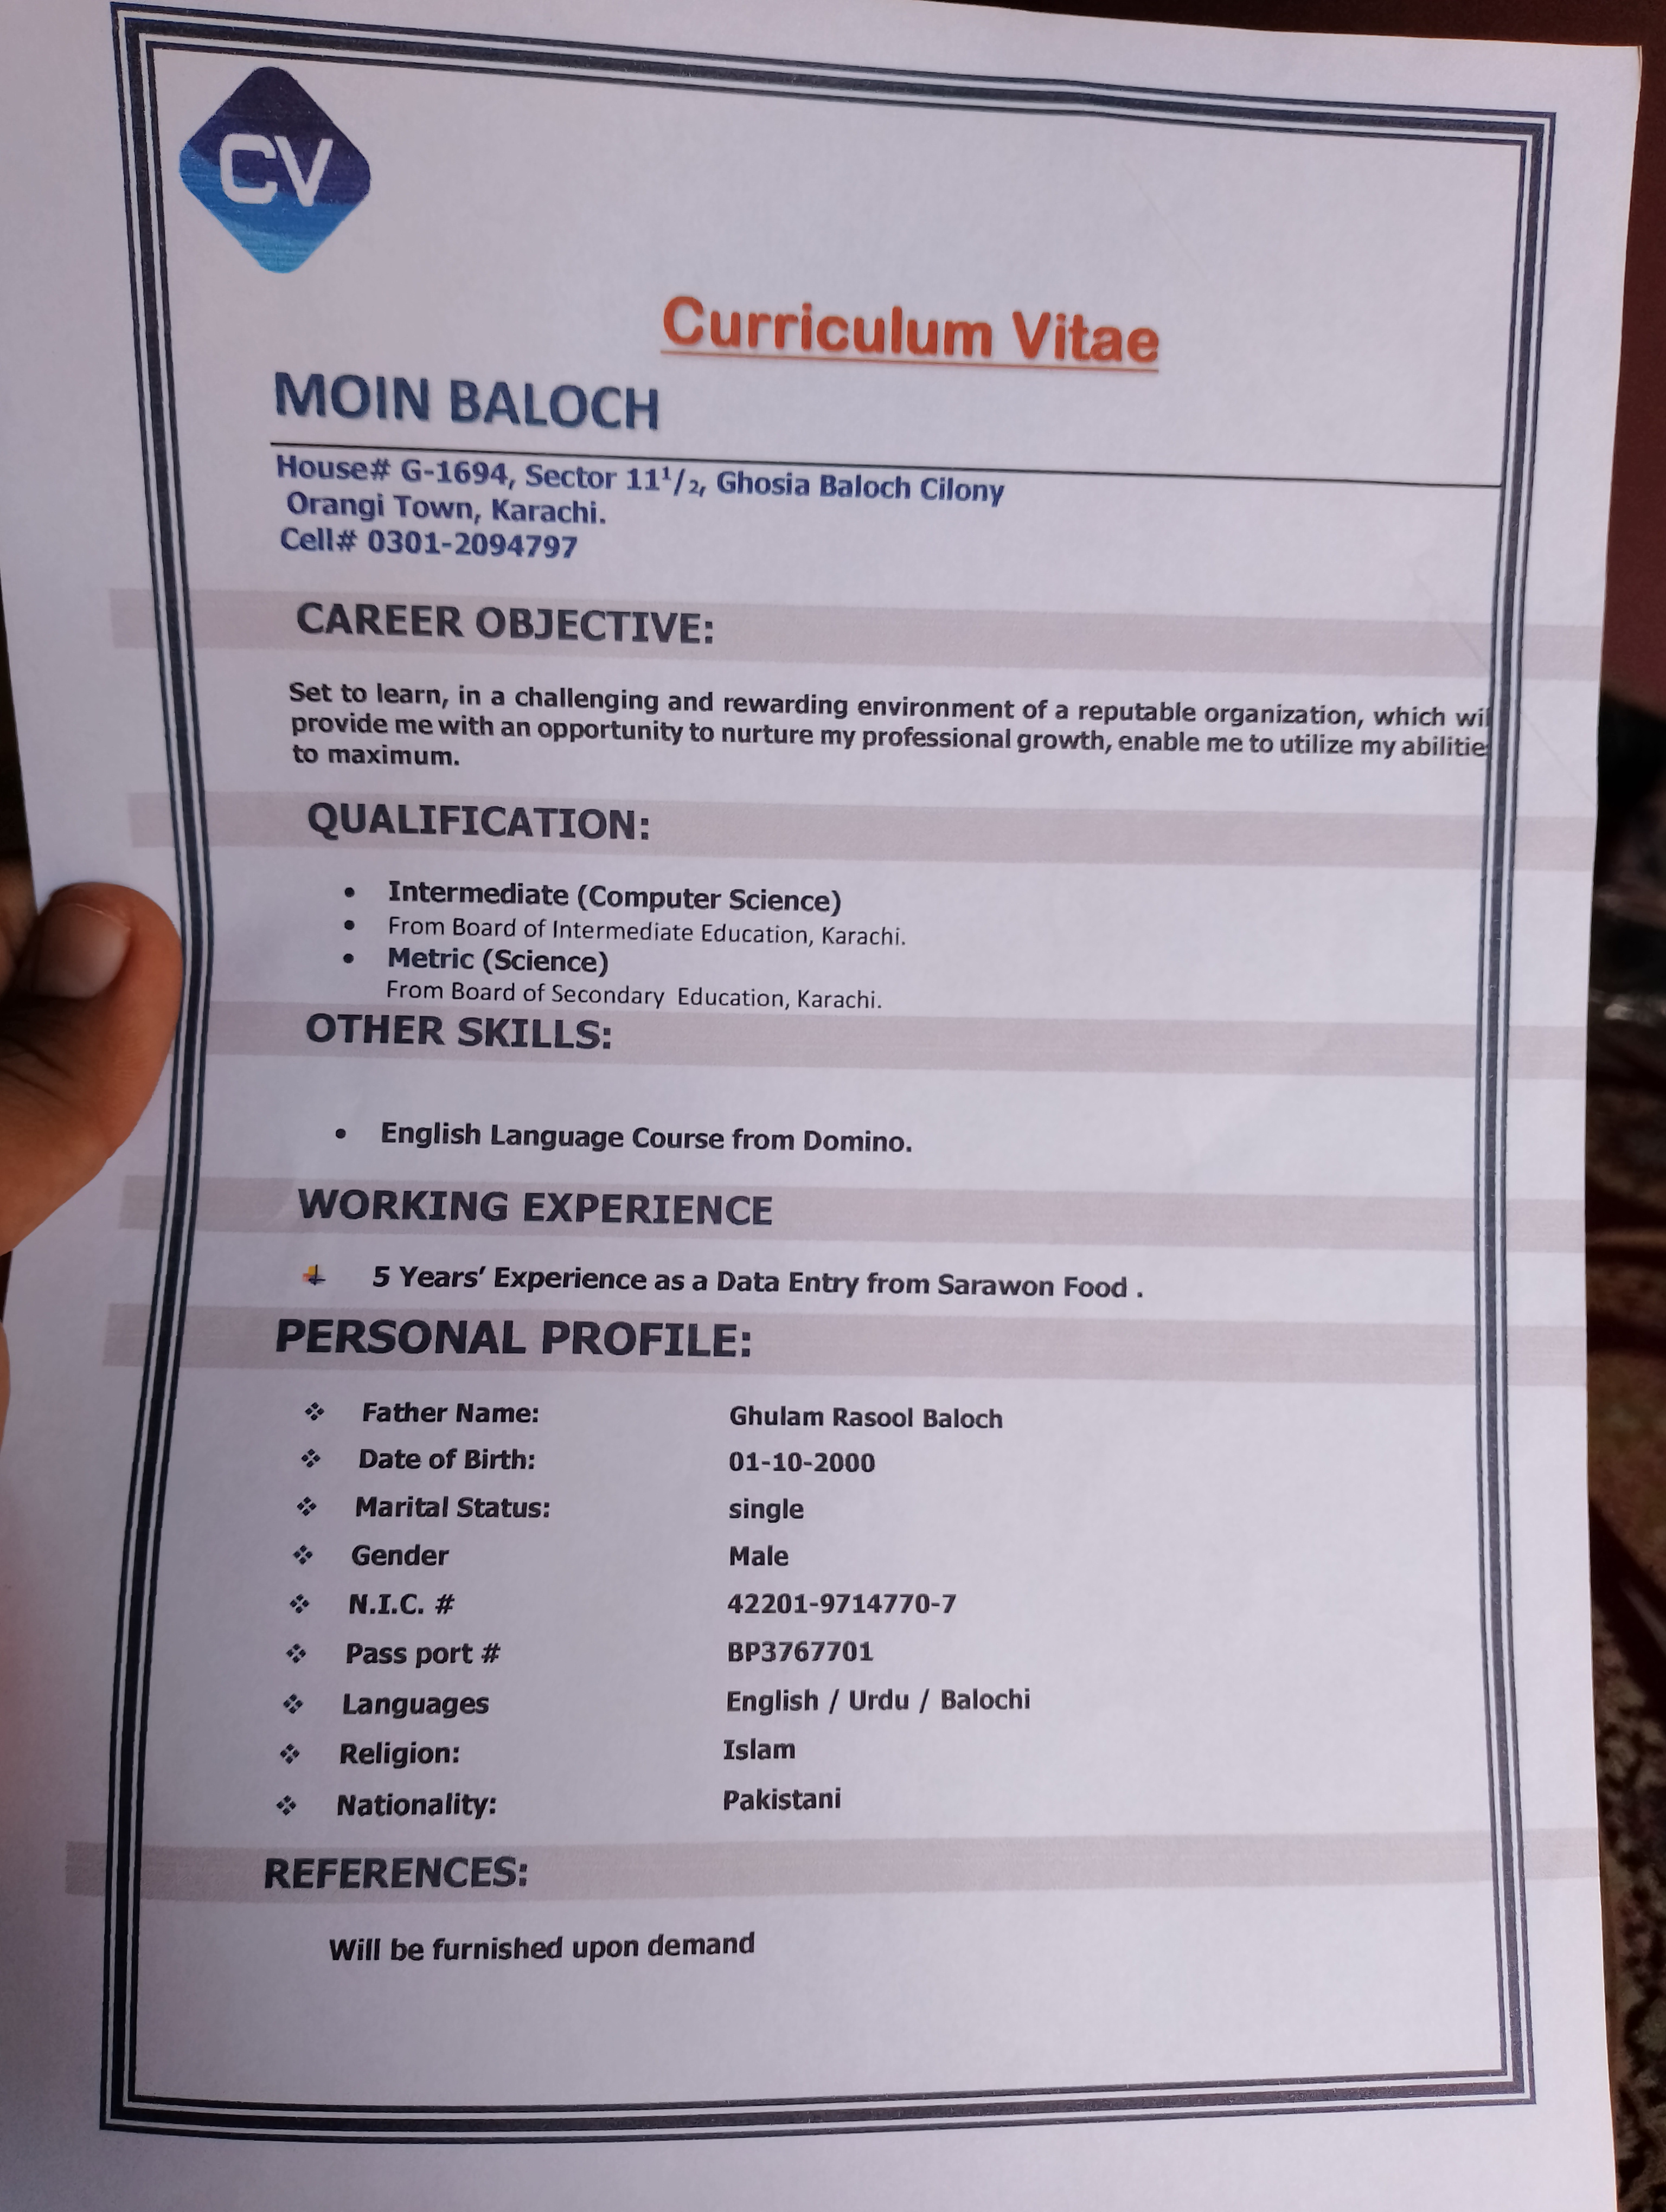 Curriculum Vitae
MOIN BALOCH

House# G-1694, Sector 11'/,, Ghosia Baloch Cilony
Orangi Town, Karachi.
Cell# 0301-2094797

CAREER OBJECTIVE:

    
 

Set to learn, in a challenging and rewarding environment of a reputable organization, which wi
provide me with an opportunity to nurture my professional growth, enable me to utilize my abilitie:
to maximum.

QUALIFICATION:

» Intermediate (Computer Science)
® From Board of Intermediate Education, Karachi.
* Metric (Science)

From Board of Secondary Education, Karachi.

OTHER SKILLS:

  
  
    
  
  
  
  
  
 

» English Language Course from Domino.

WORKING EXPERIENCE
4 5 Years’ Experience as a Data Entry from Sarawon Food .

PERSONAL PROFILE:

  

 
   
  
  
  
   
  
    
  

¥
+

< Father Name: Ghulam Rasool Baloch

< Date of Birth: 01-10-2000

+ Marital Status: single

+ Gender Male

% NIC # 42201-9714770-7

s Pass port # BP3767701

% Languages English / Urdu / Balochi
< Religion: Islam
% Nationality: Pakistani

~ REFERENCES:

Will be furnished upon demand